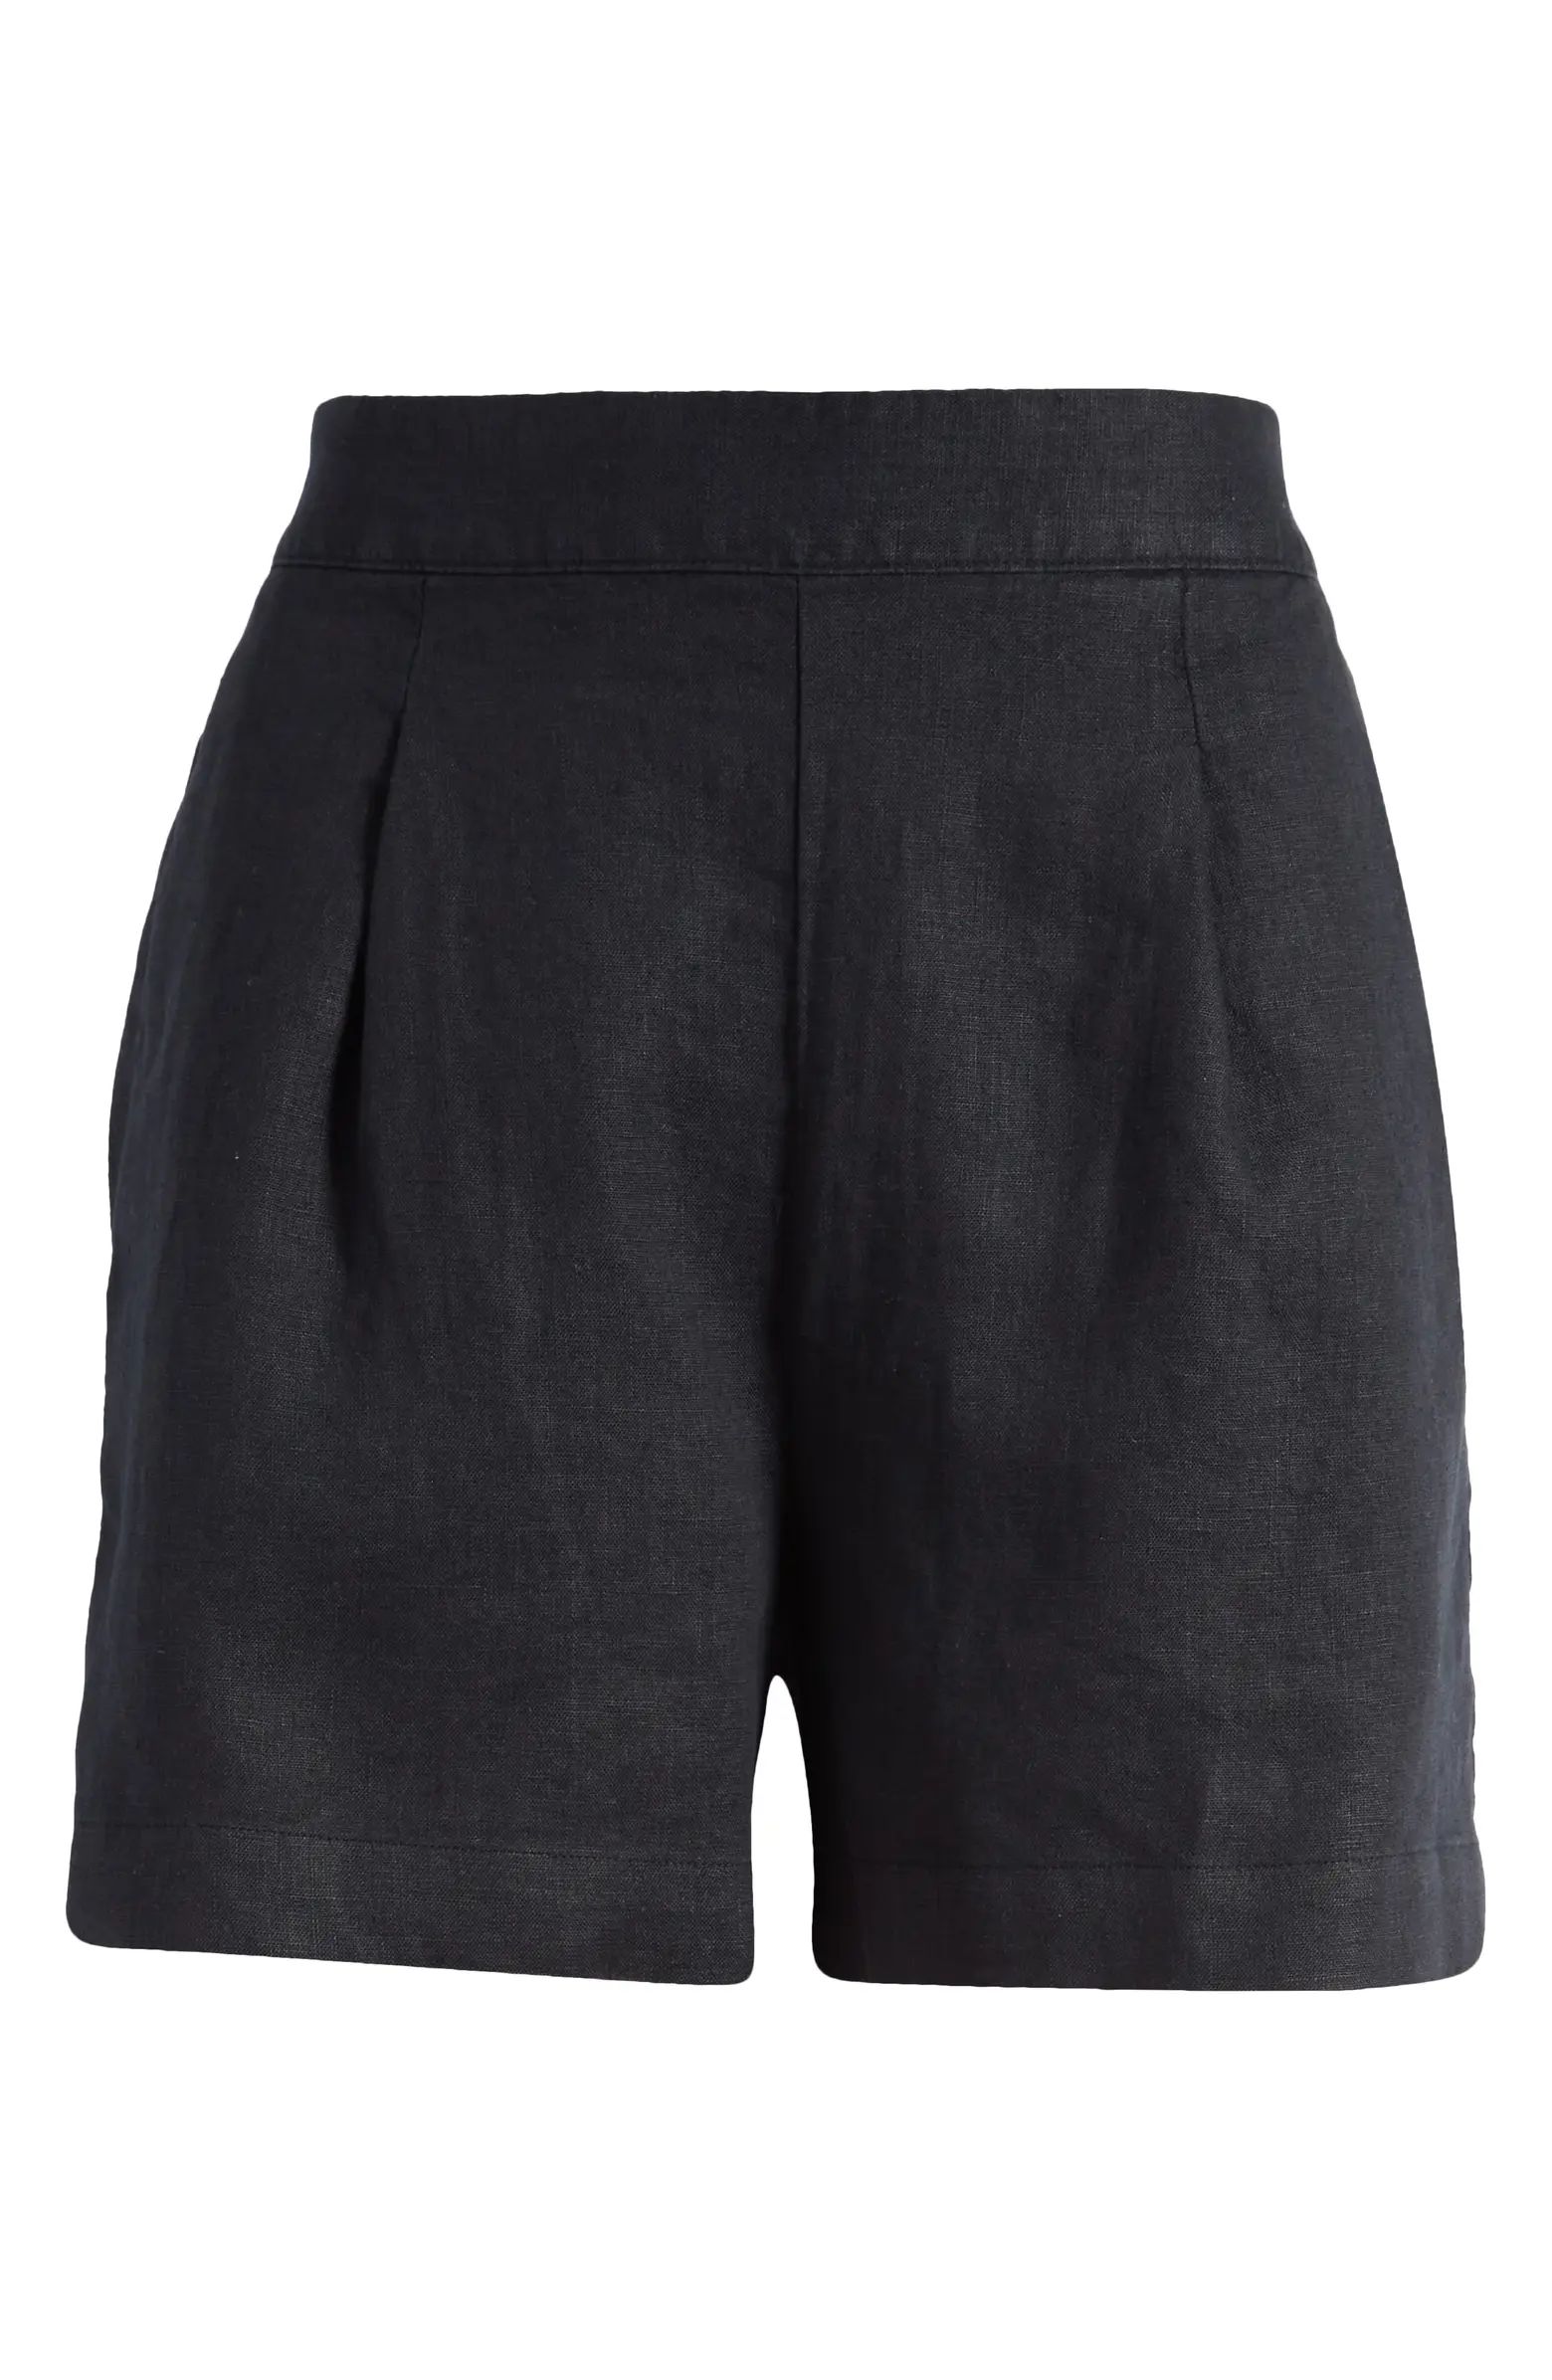 Clean Linen Pull-On Shorts | Nordstrom